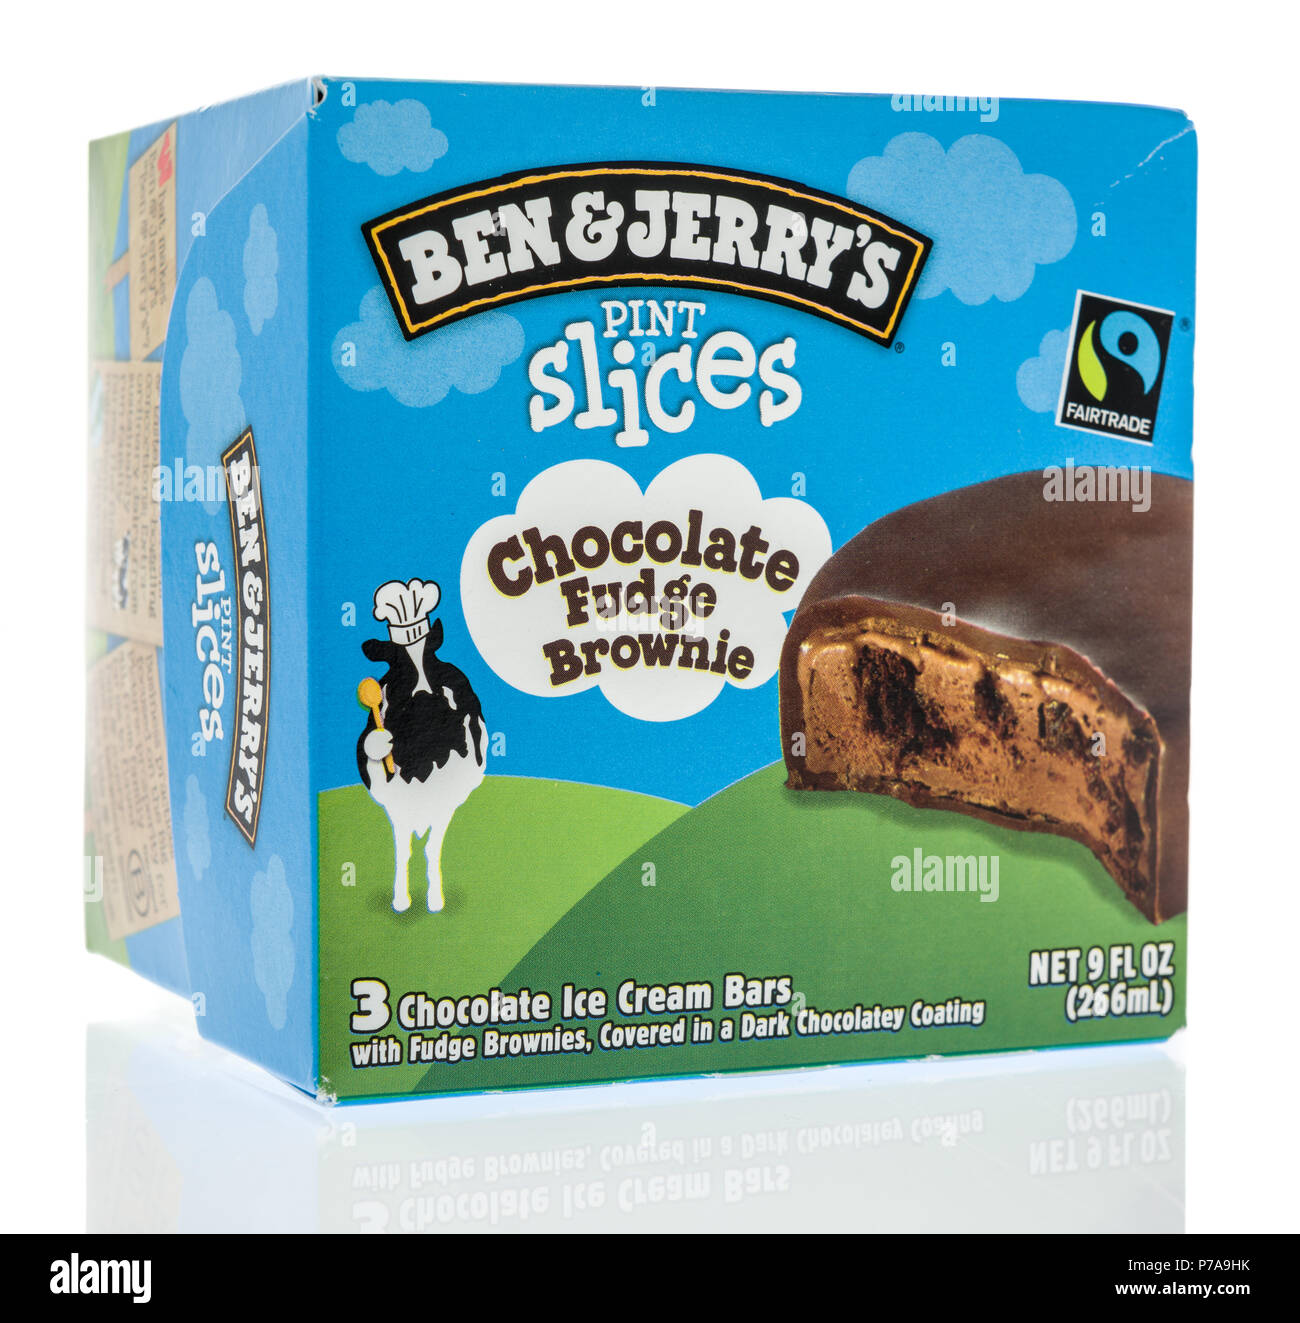 Winneconne, WI - 1 July 2018: A box of Ben and Jerry's pint slices ice cream bars in chocolate fudge brownie flavor on an isolated background. Stock Photo